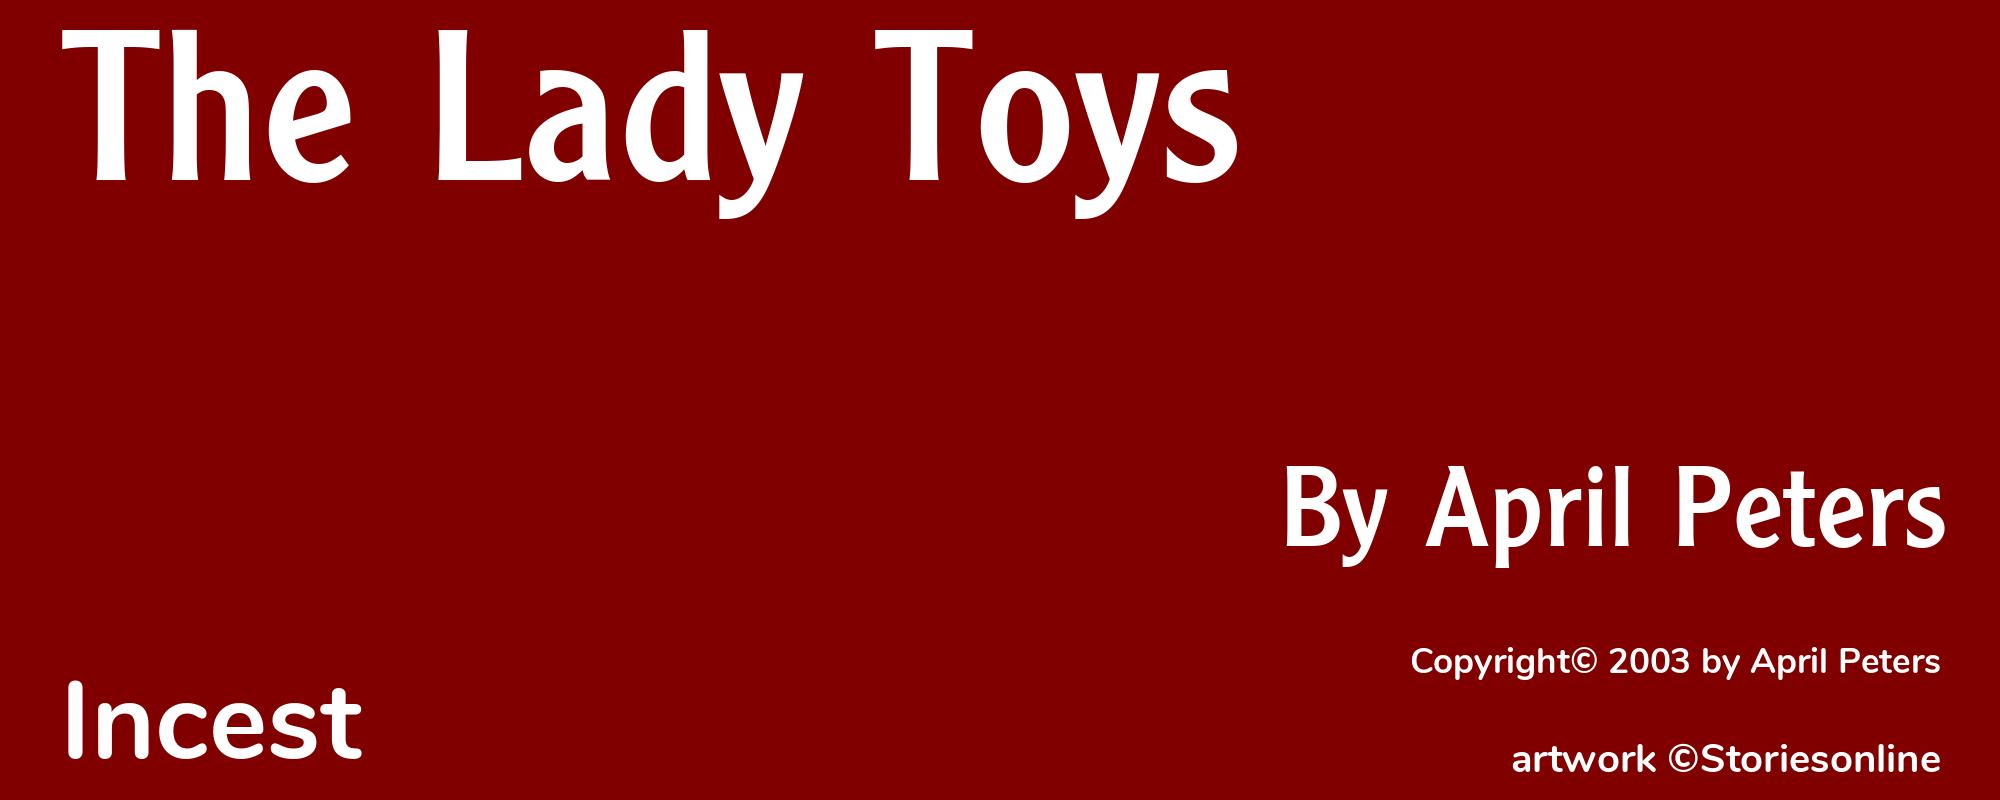 The Lady Toys - Cover